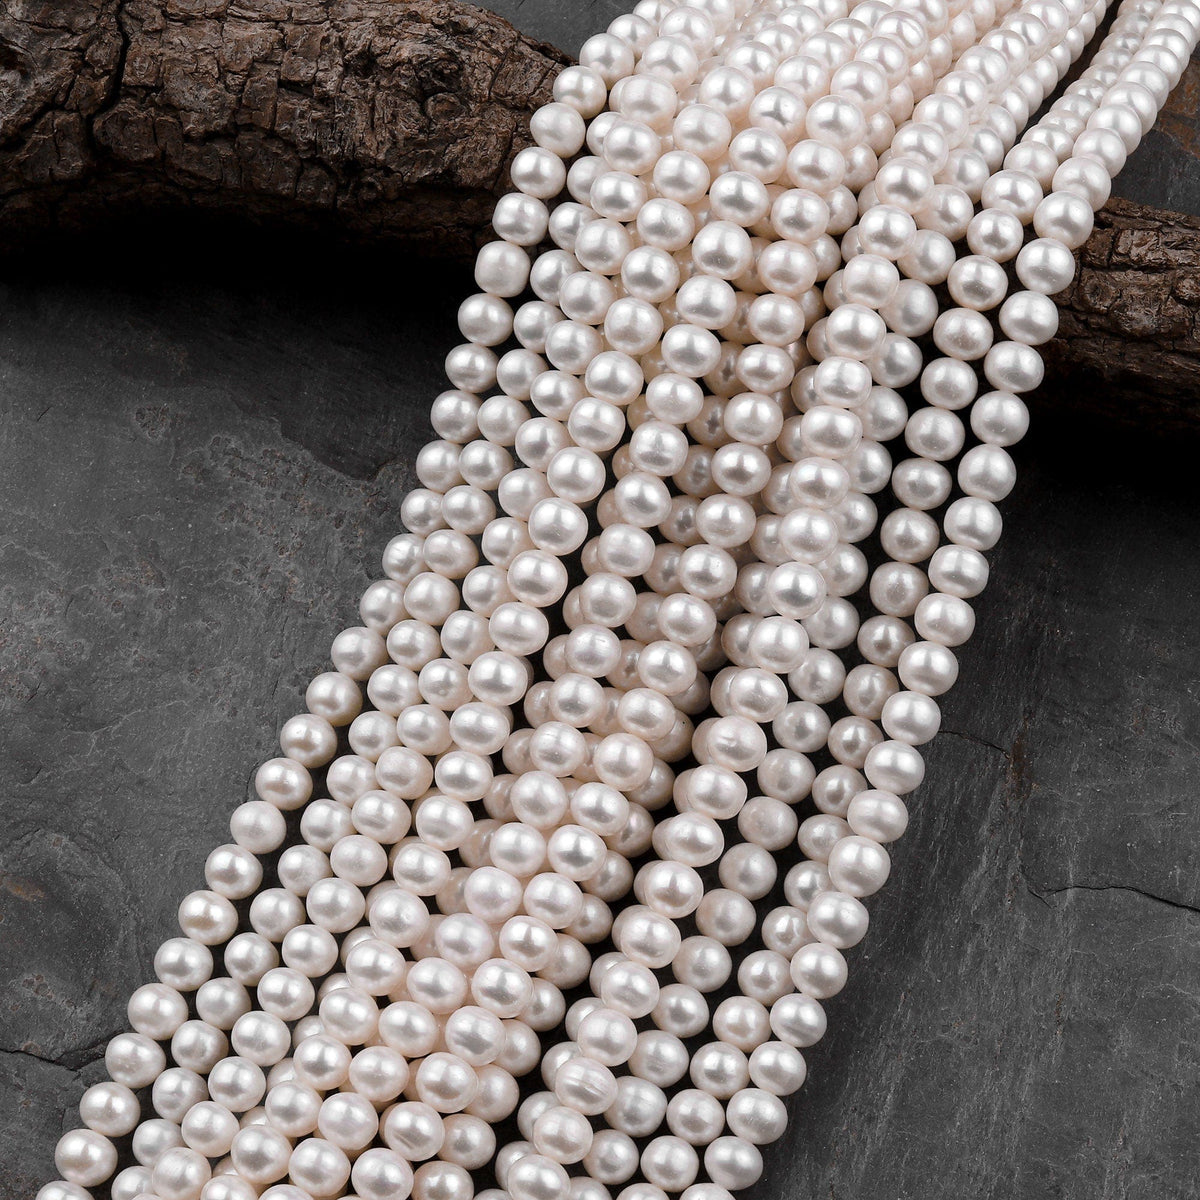 10 mm or 0.39 Loose Beads Faux Pearls White